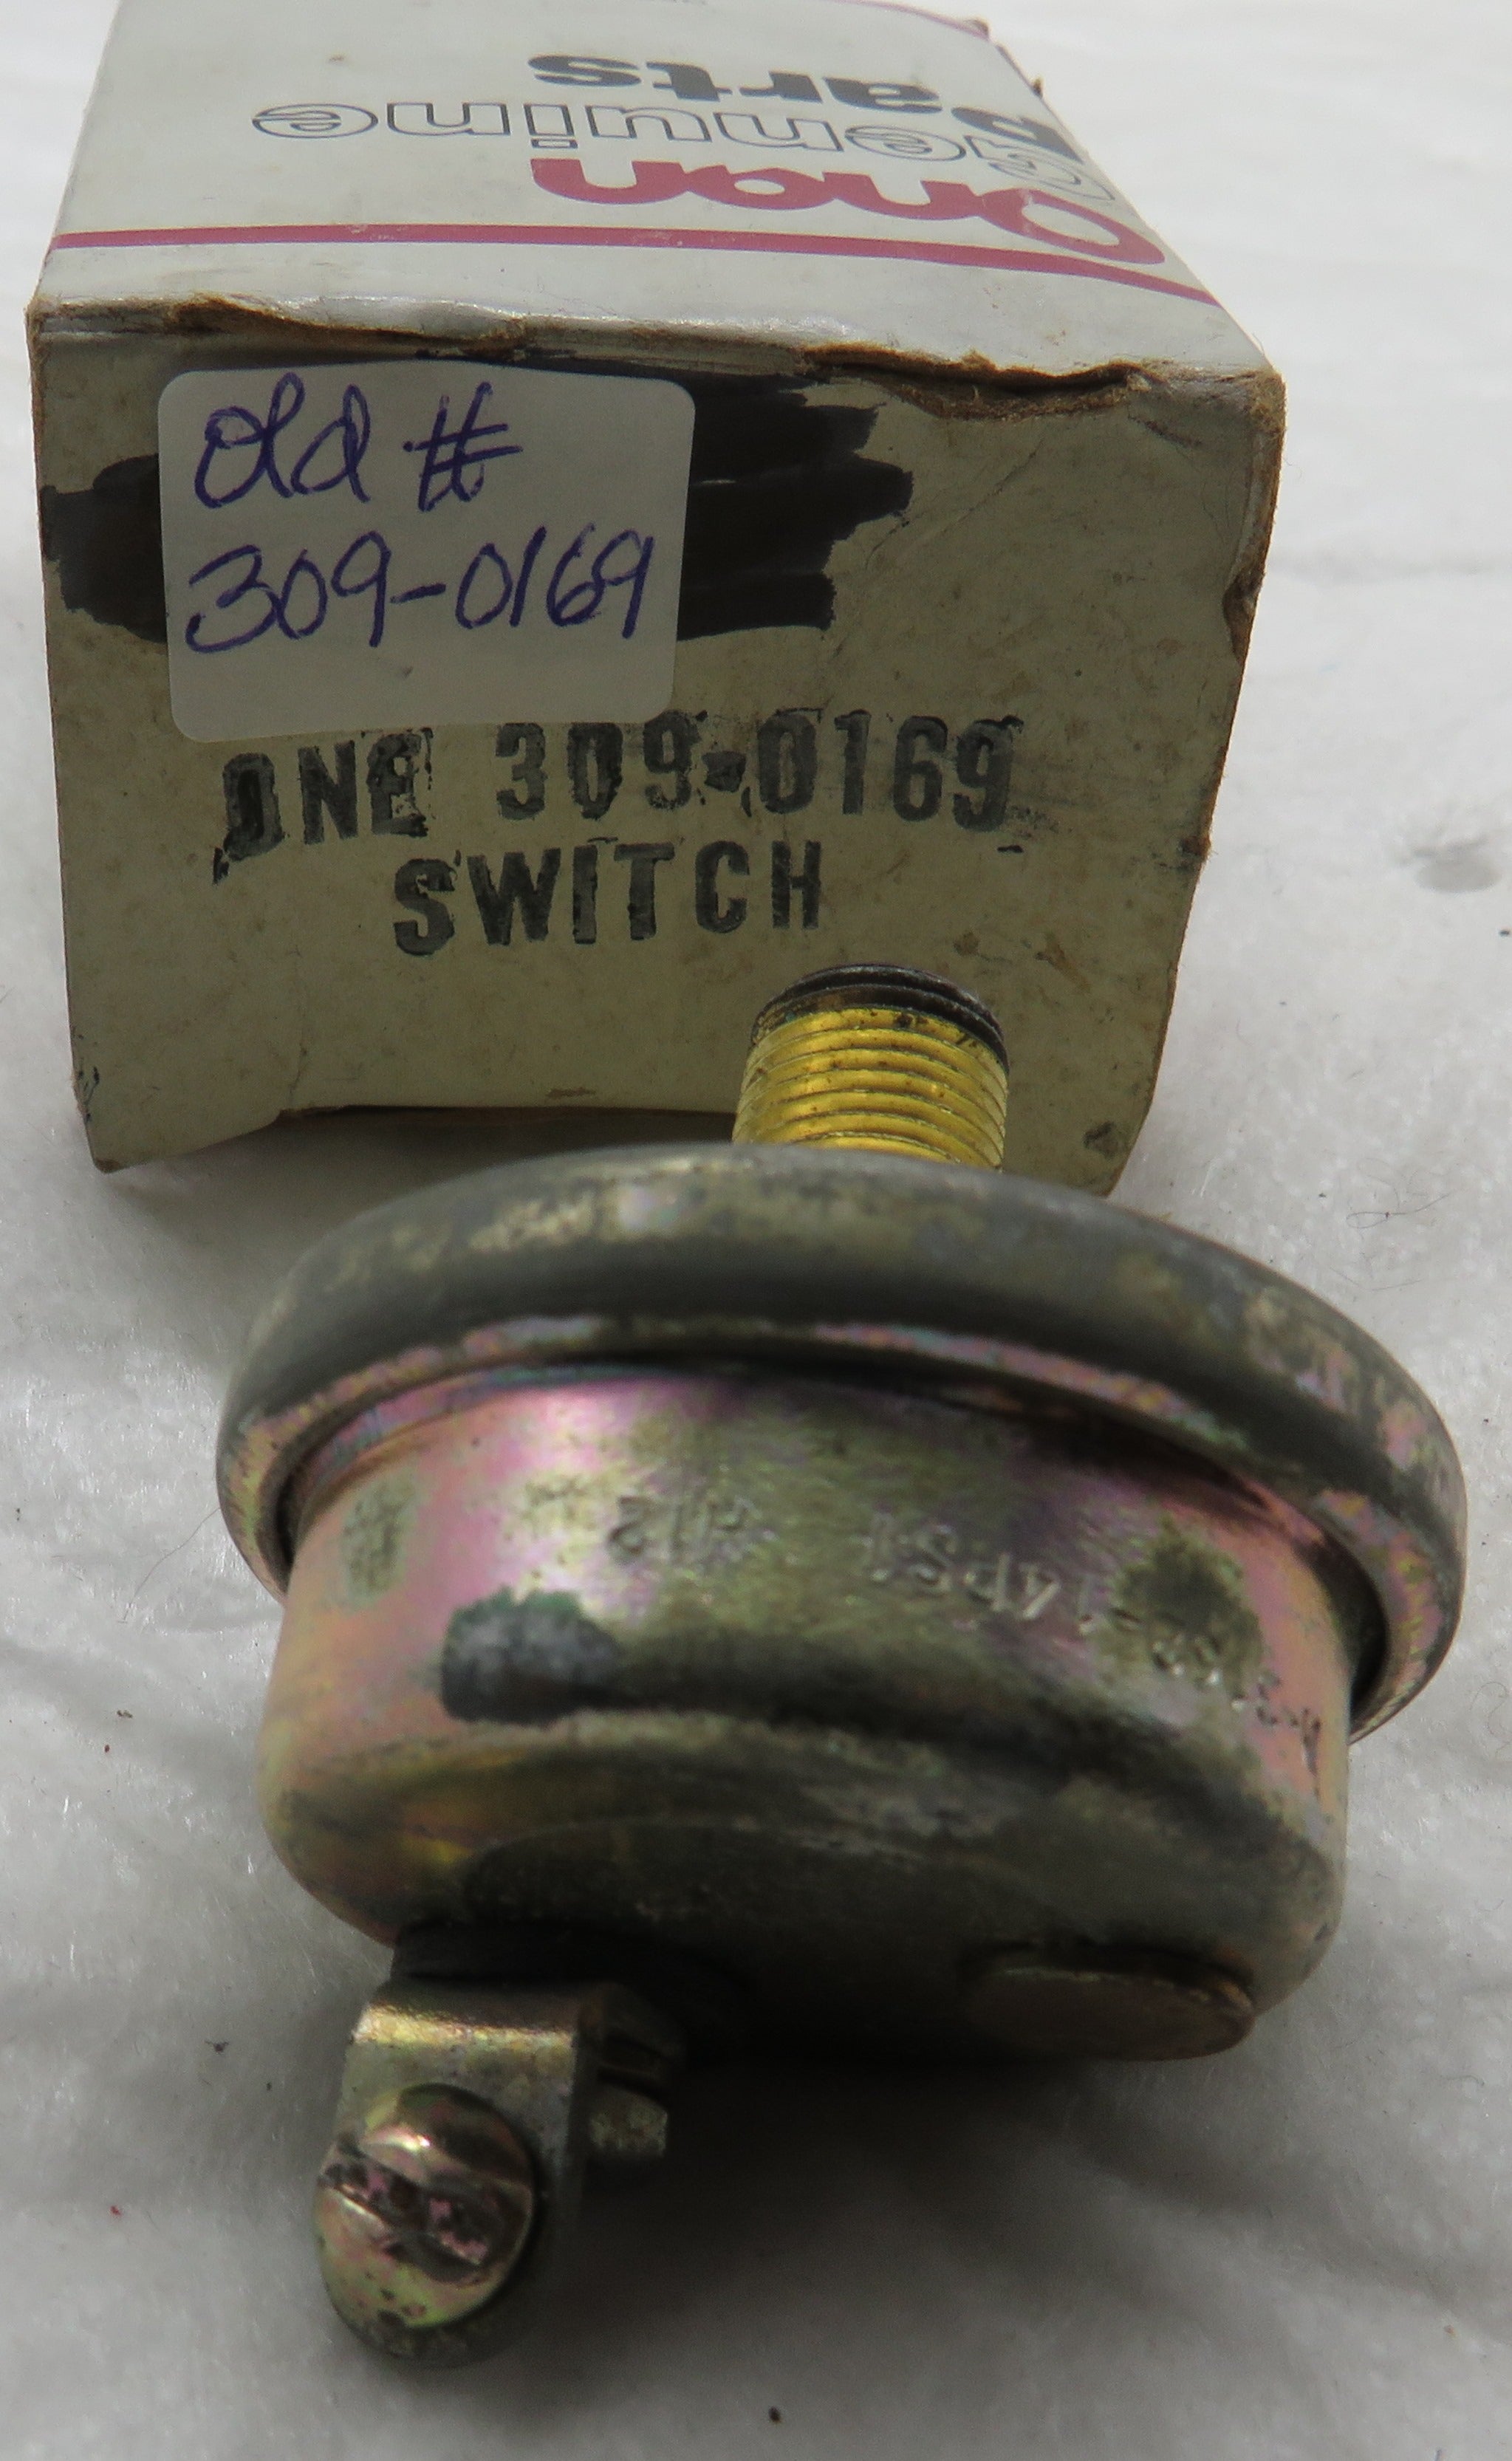 309-0641-01 Onan Pressure Switch (Superseded Old# 309-0169) Rated 14 Psi 